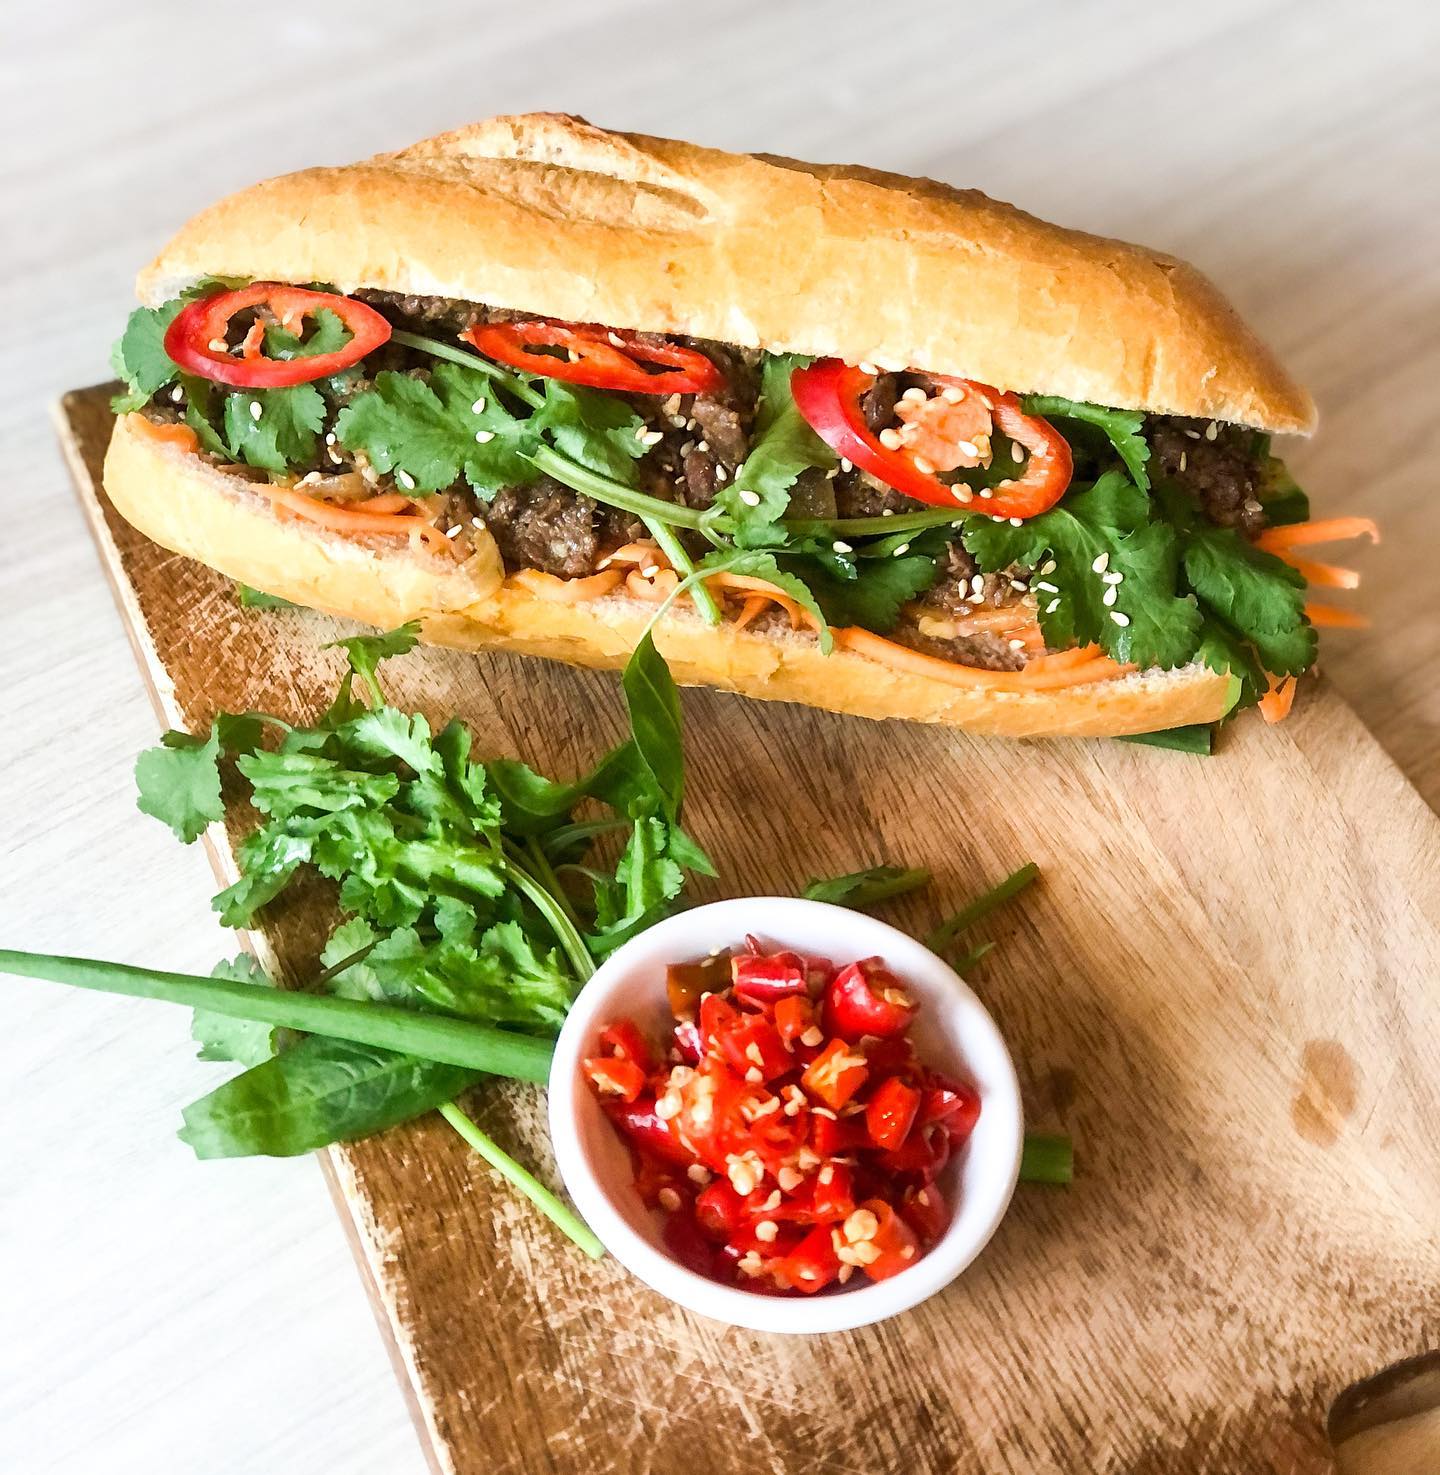 Banh mi is available everyday until 4:30pm or sold out. Order now your favourite roll via our website hanoirose.com.au or through one of our delivery partners. Dine in available too. Gluten free option is also available.

#banhmi #vietnameserolls #vietnamesefood #vietnamesecuisine #grabandgo #dineinavailable #freshfood #melbournerestaurants #brunswick #hanoirose #foodforfoodies